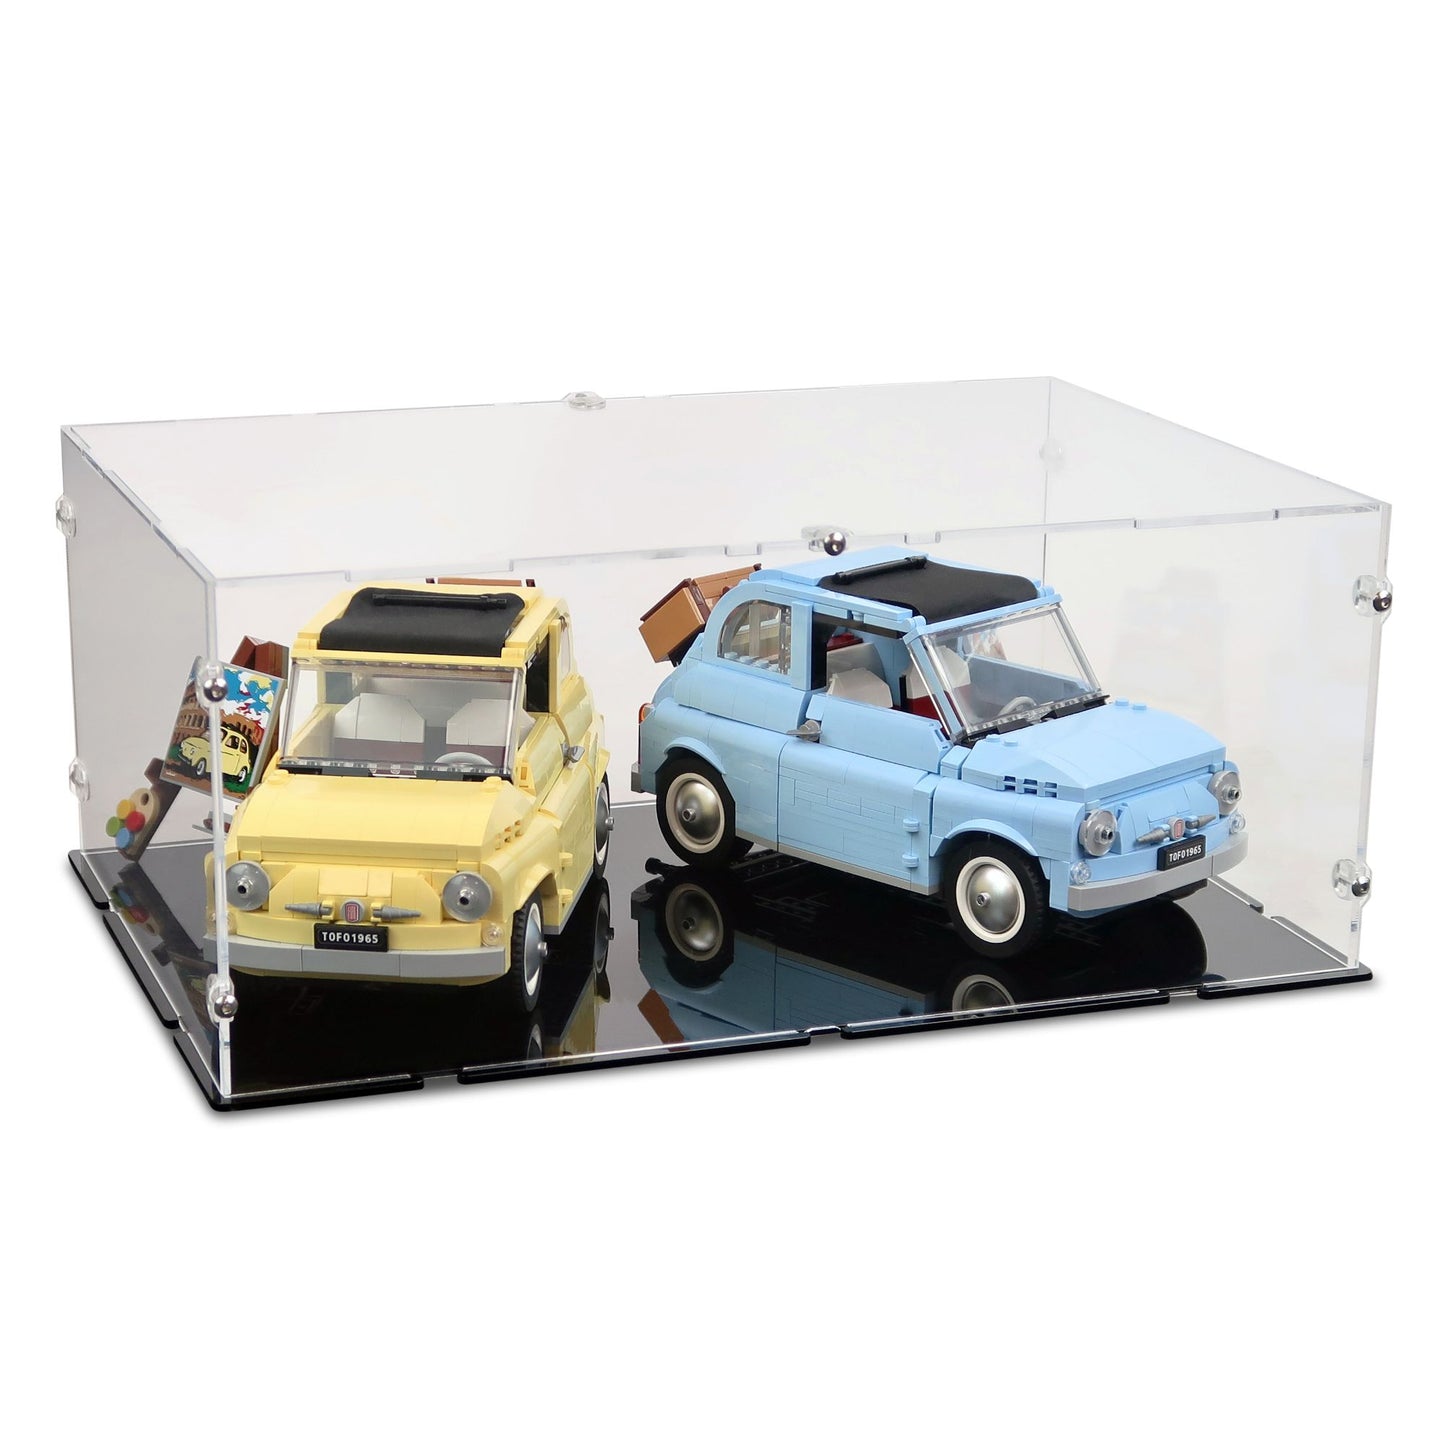 The Double Fiat Car Collection Display Case